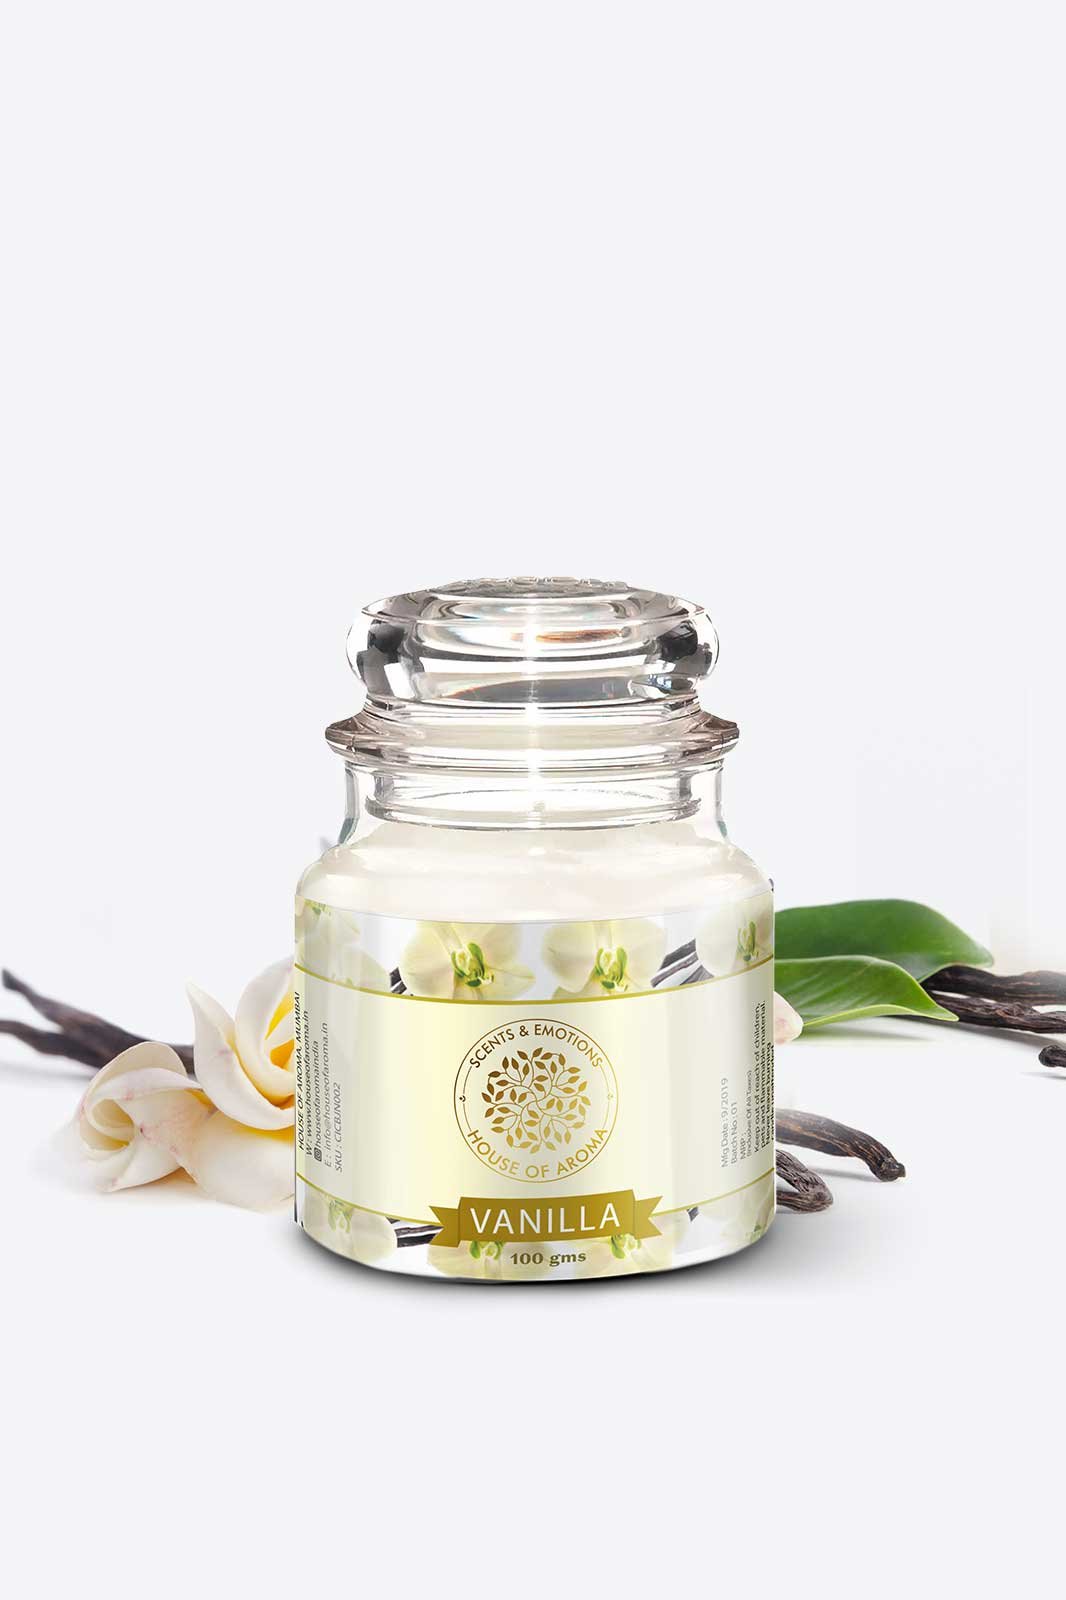 vanilla bell jar candle, scented candle vanilla, vanilla almond candle, vanilla amber candle, vanilla birch candle, vanilla candle amazon, vanilla candle and diffuser set, vanilla candle best, vanilla candle fragrance, vanilla candle gift, House of Aroma, scented candles online, home decor scented candles, organic scented candles,